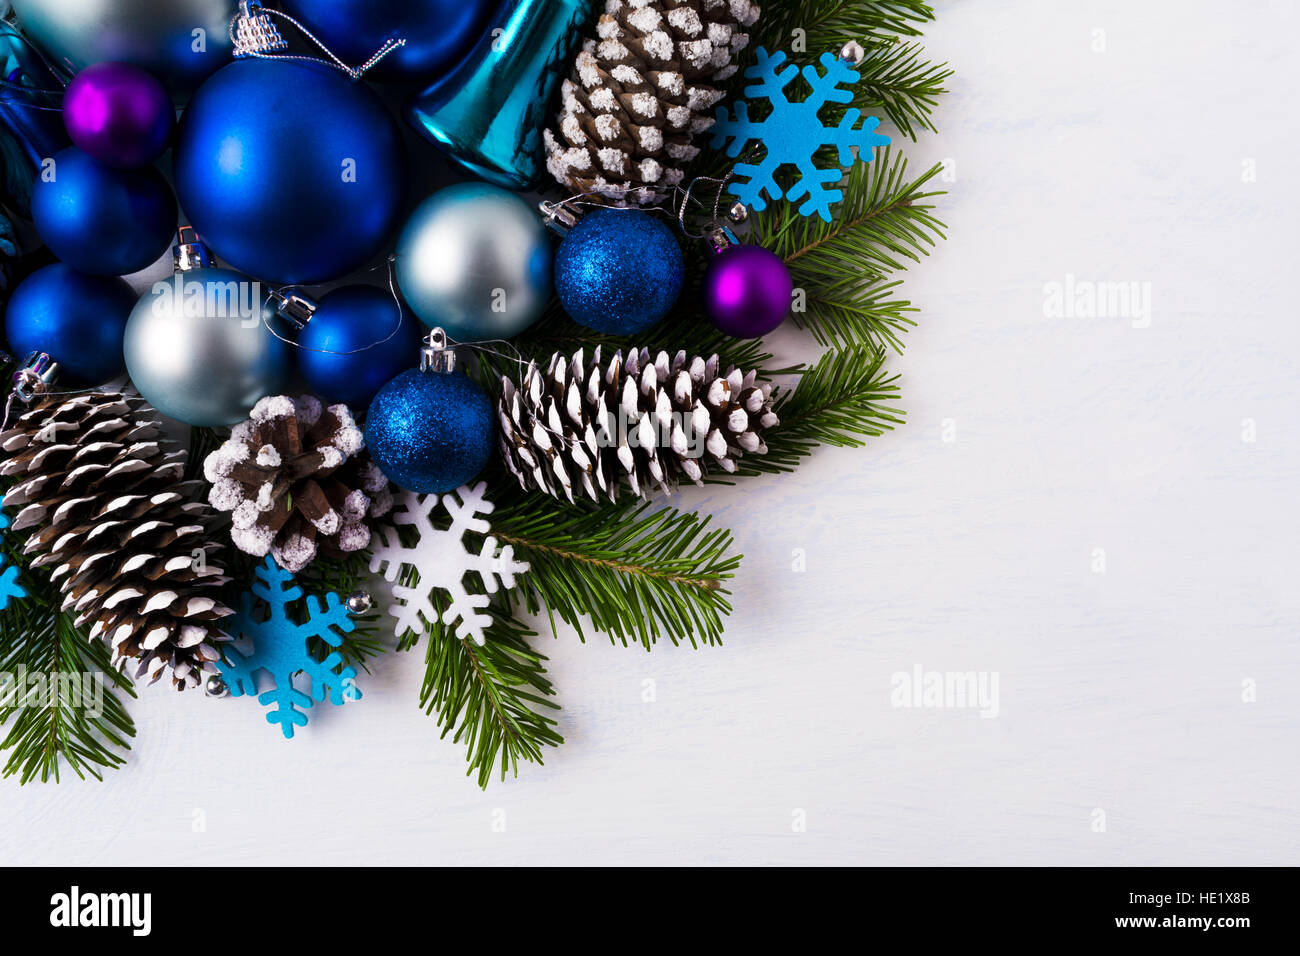 Christmas greeting background with blue and white felt snowflakes. Christmas decoration with blue color shades ornaments and snowy pine cones. Copy sp Stock Photo